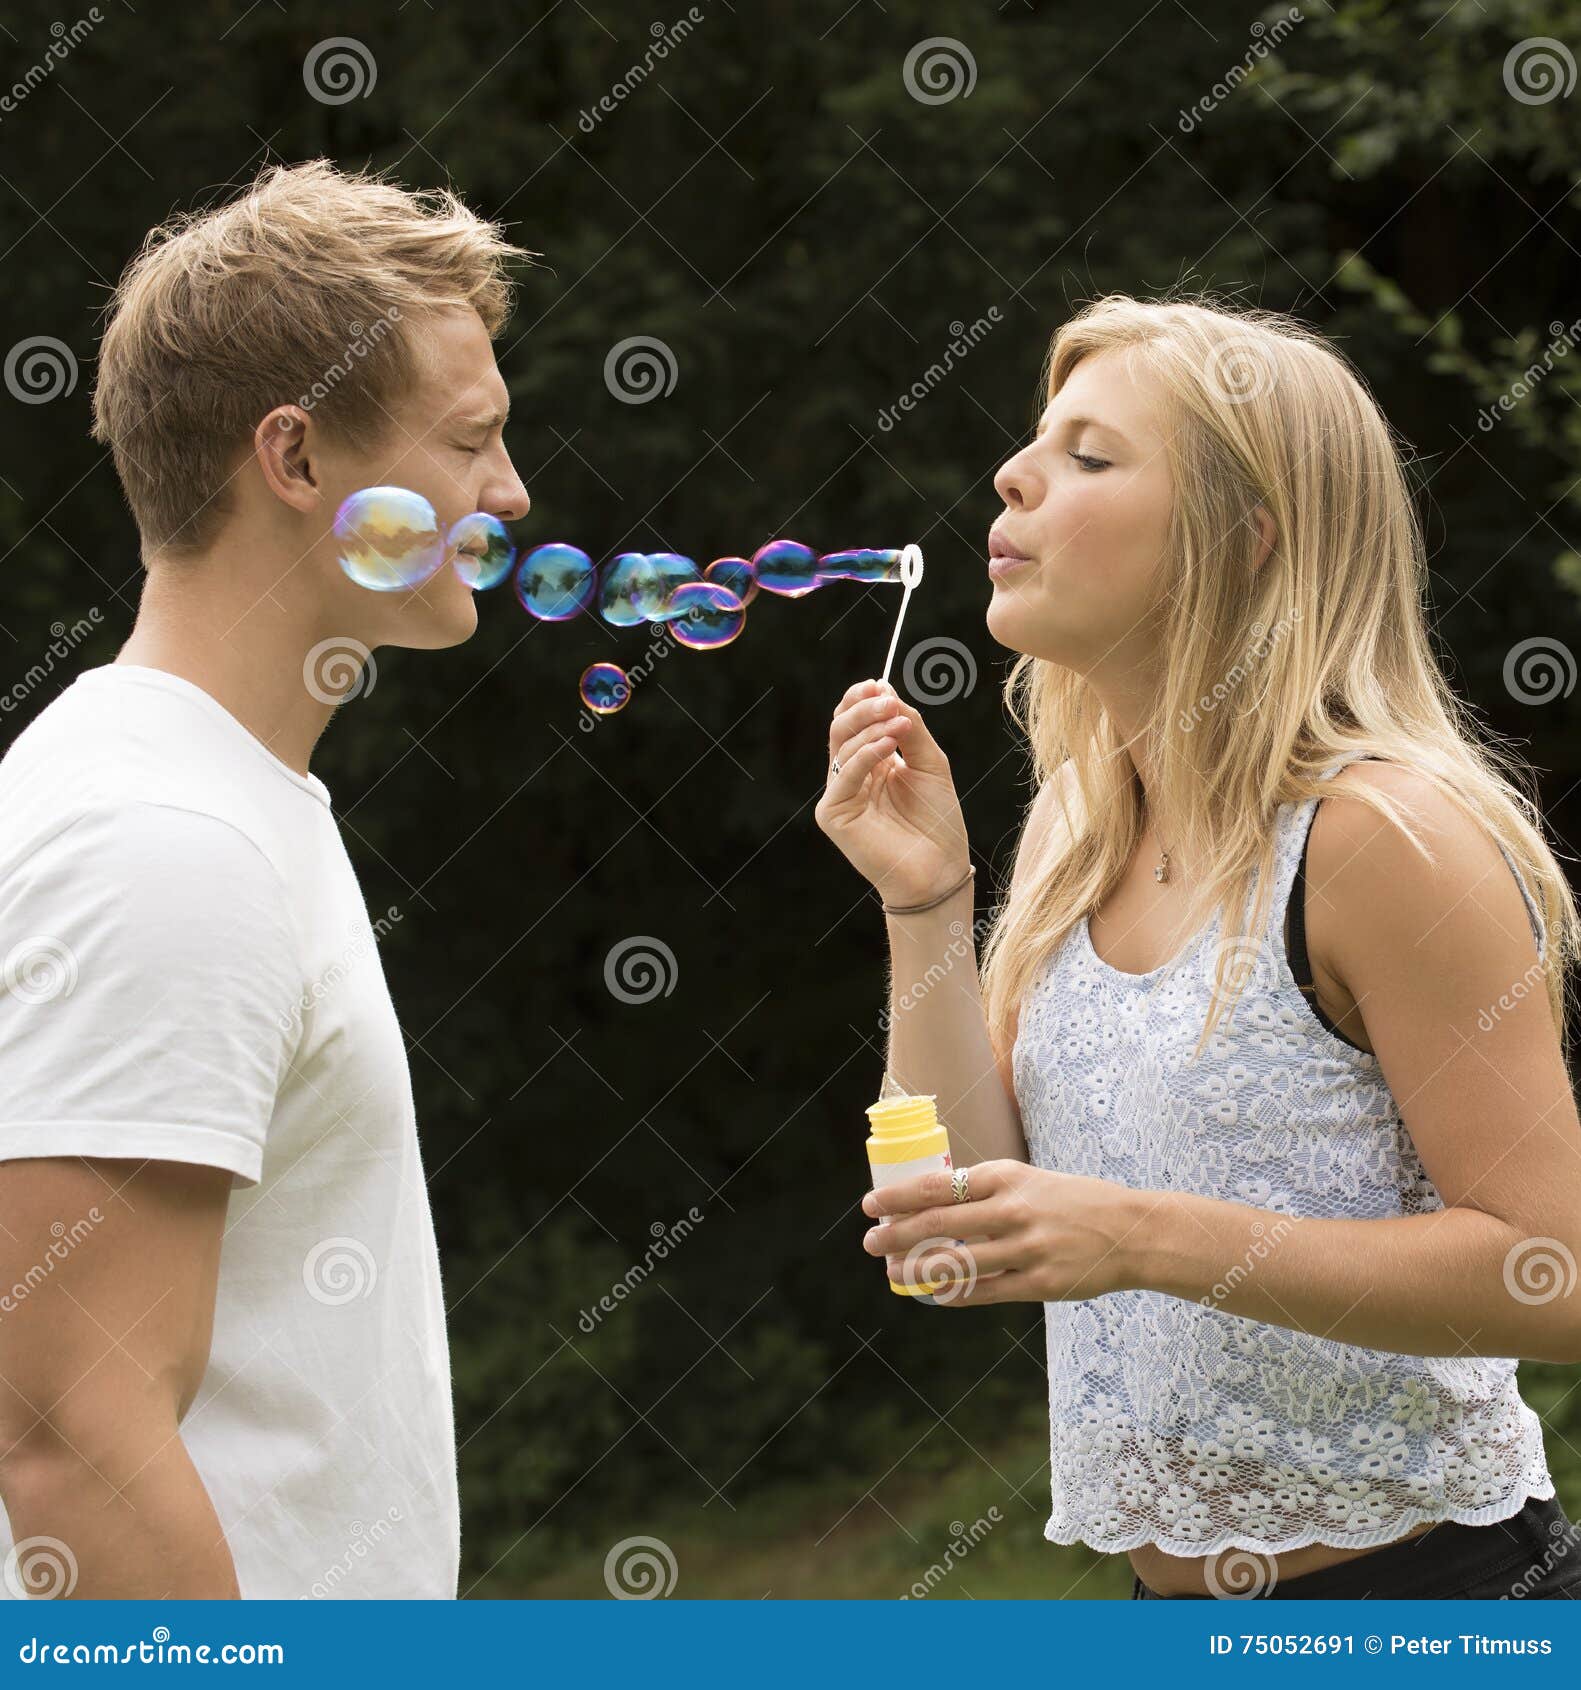 Blond Girl Blowing Bubbles Stock Image Image Of Play